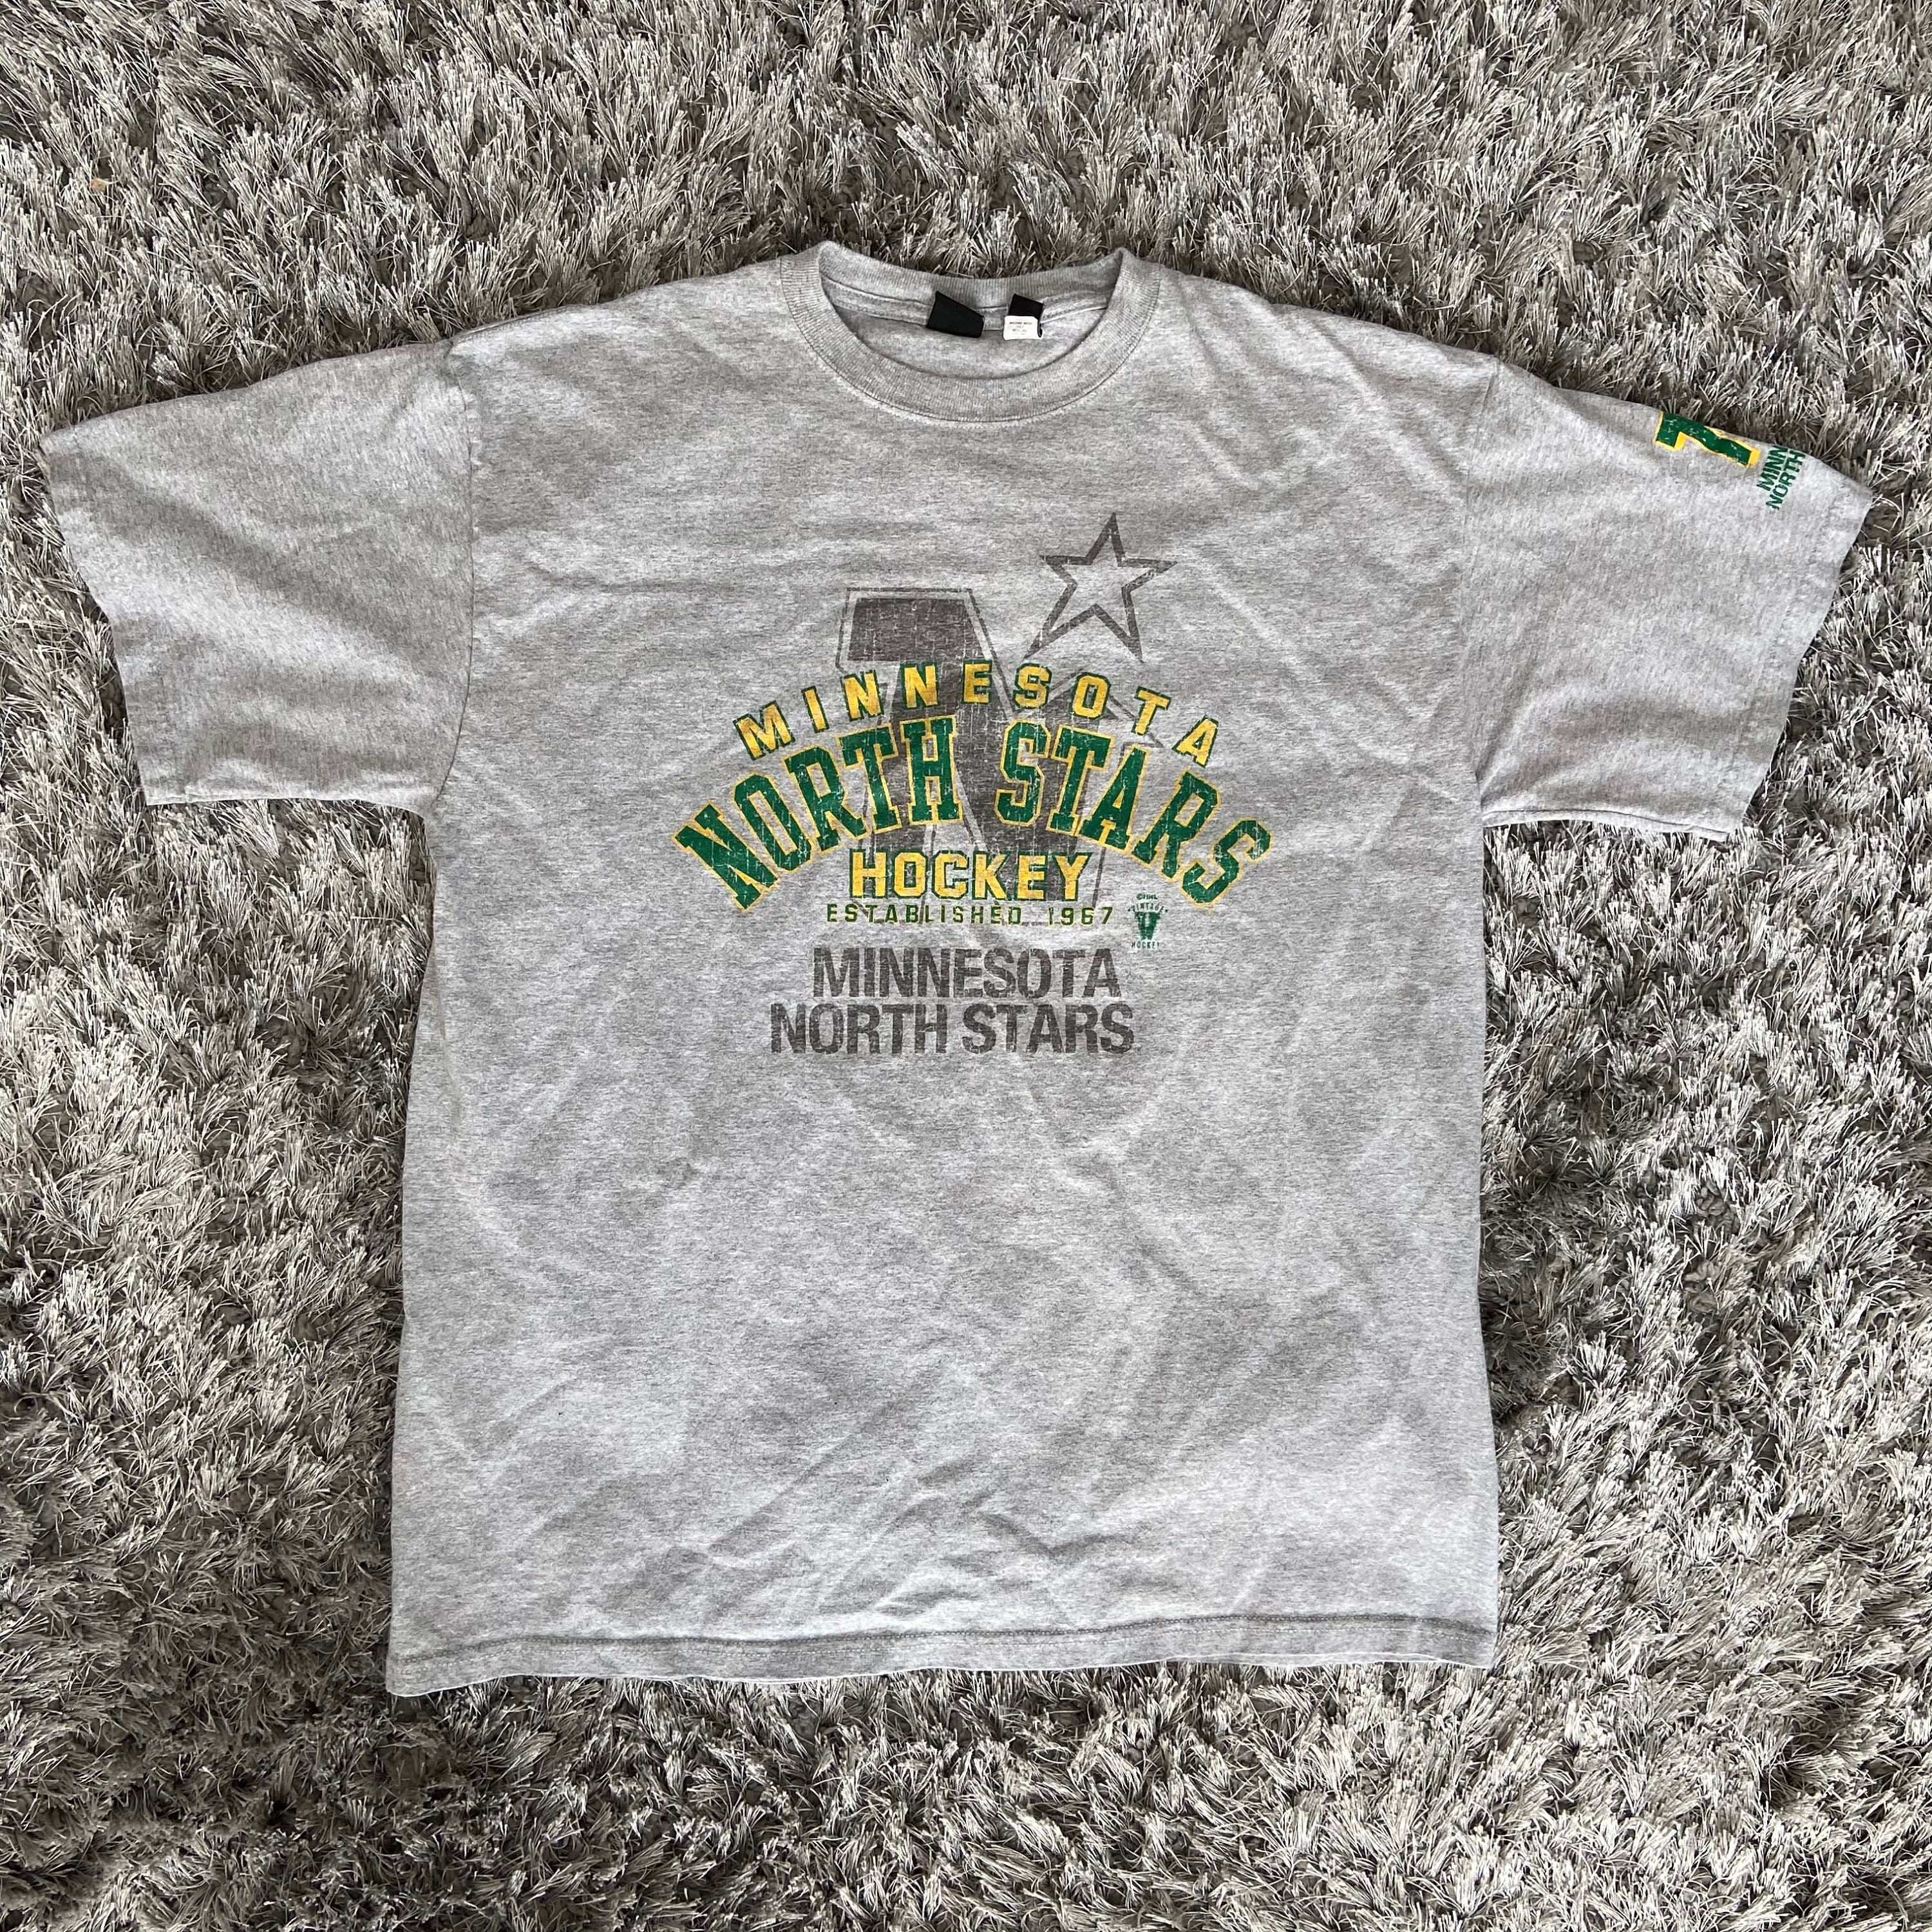 LegacyVintage99 Vintage Minnesota North Stars T Shirt Tee Trench Made USA Size Xtra Large XL NHL Hockey 1990s 90s